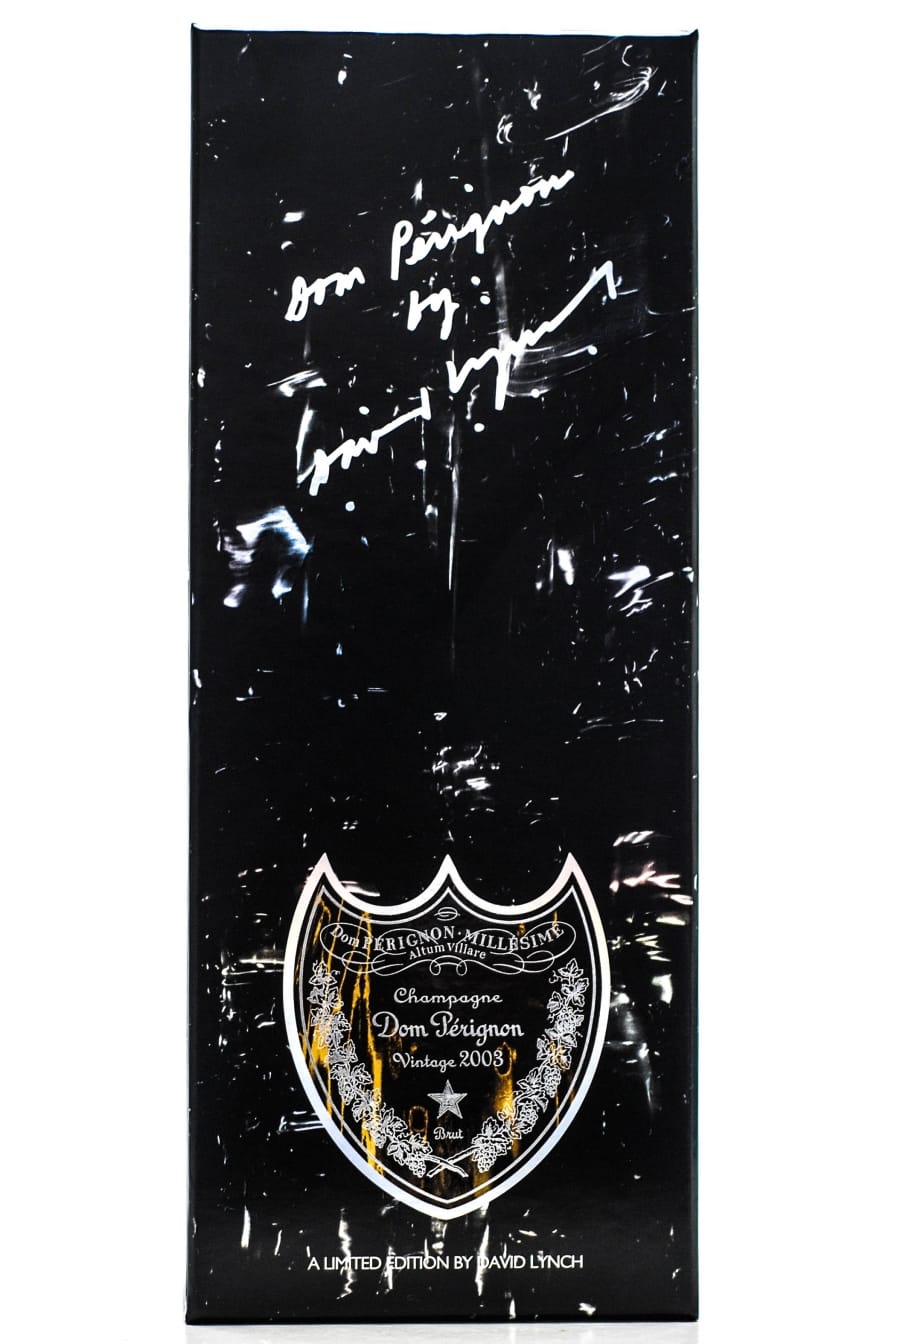 Moet Chandon - Dom Perignon Brut David Lynch limited edition 2003 From Original Wooden Case